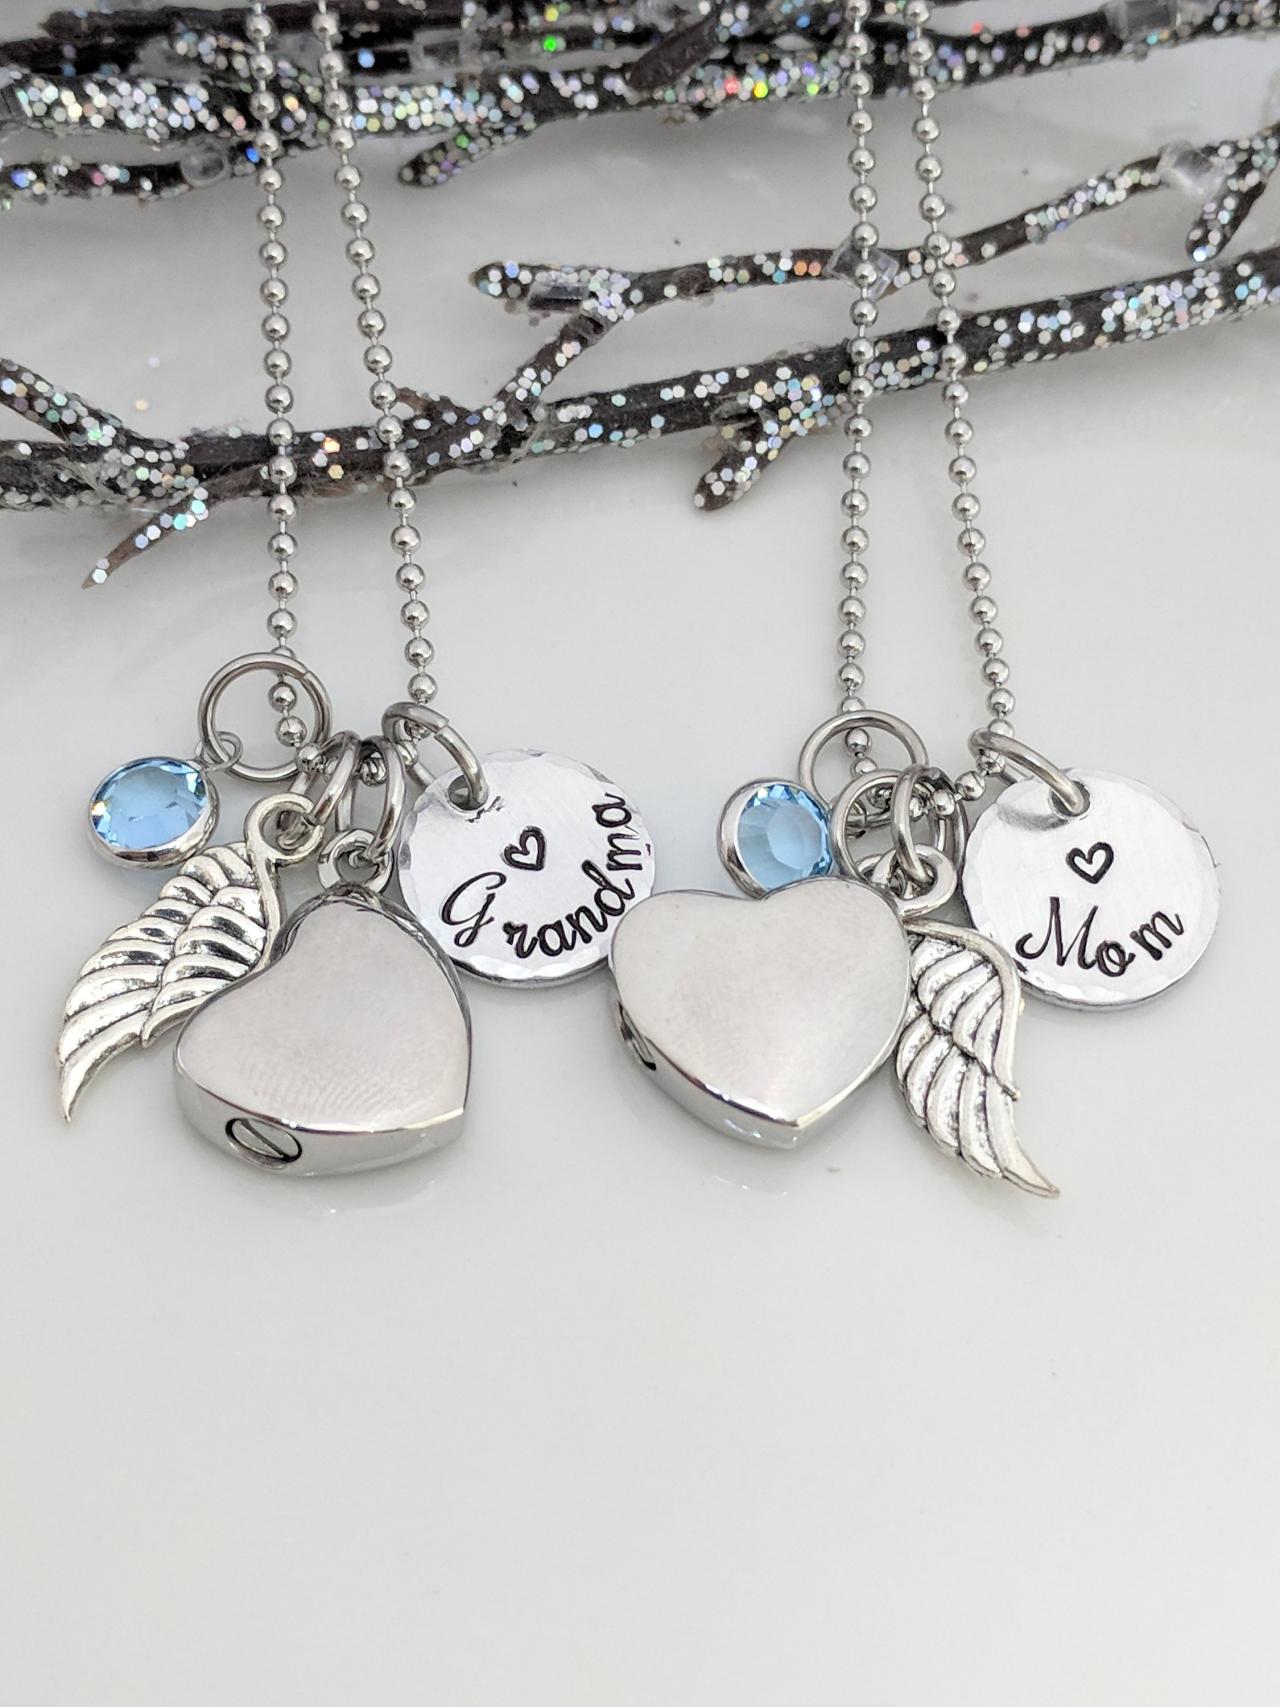 Hand Stamped Necklace In Memory Of - Hand Stamped Jewelry Memorial Keepsake - Keepsake Jewelry - Wing Charm - Ash Jewelry - Urn Necklace - Urn